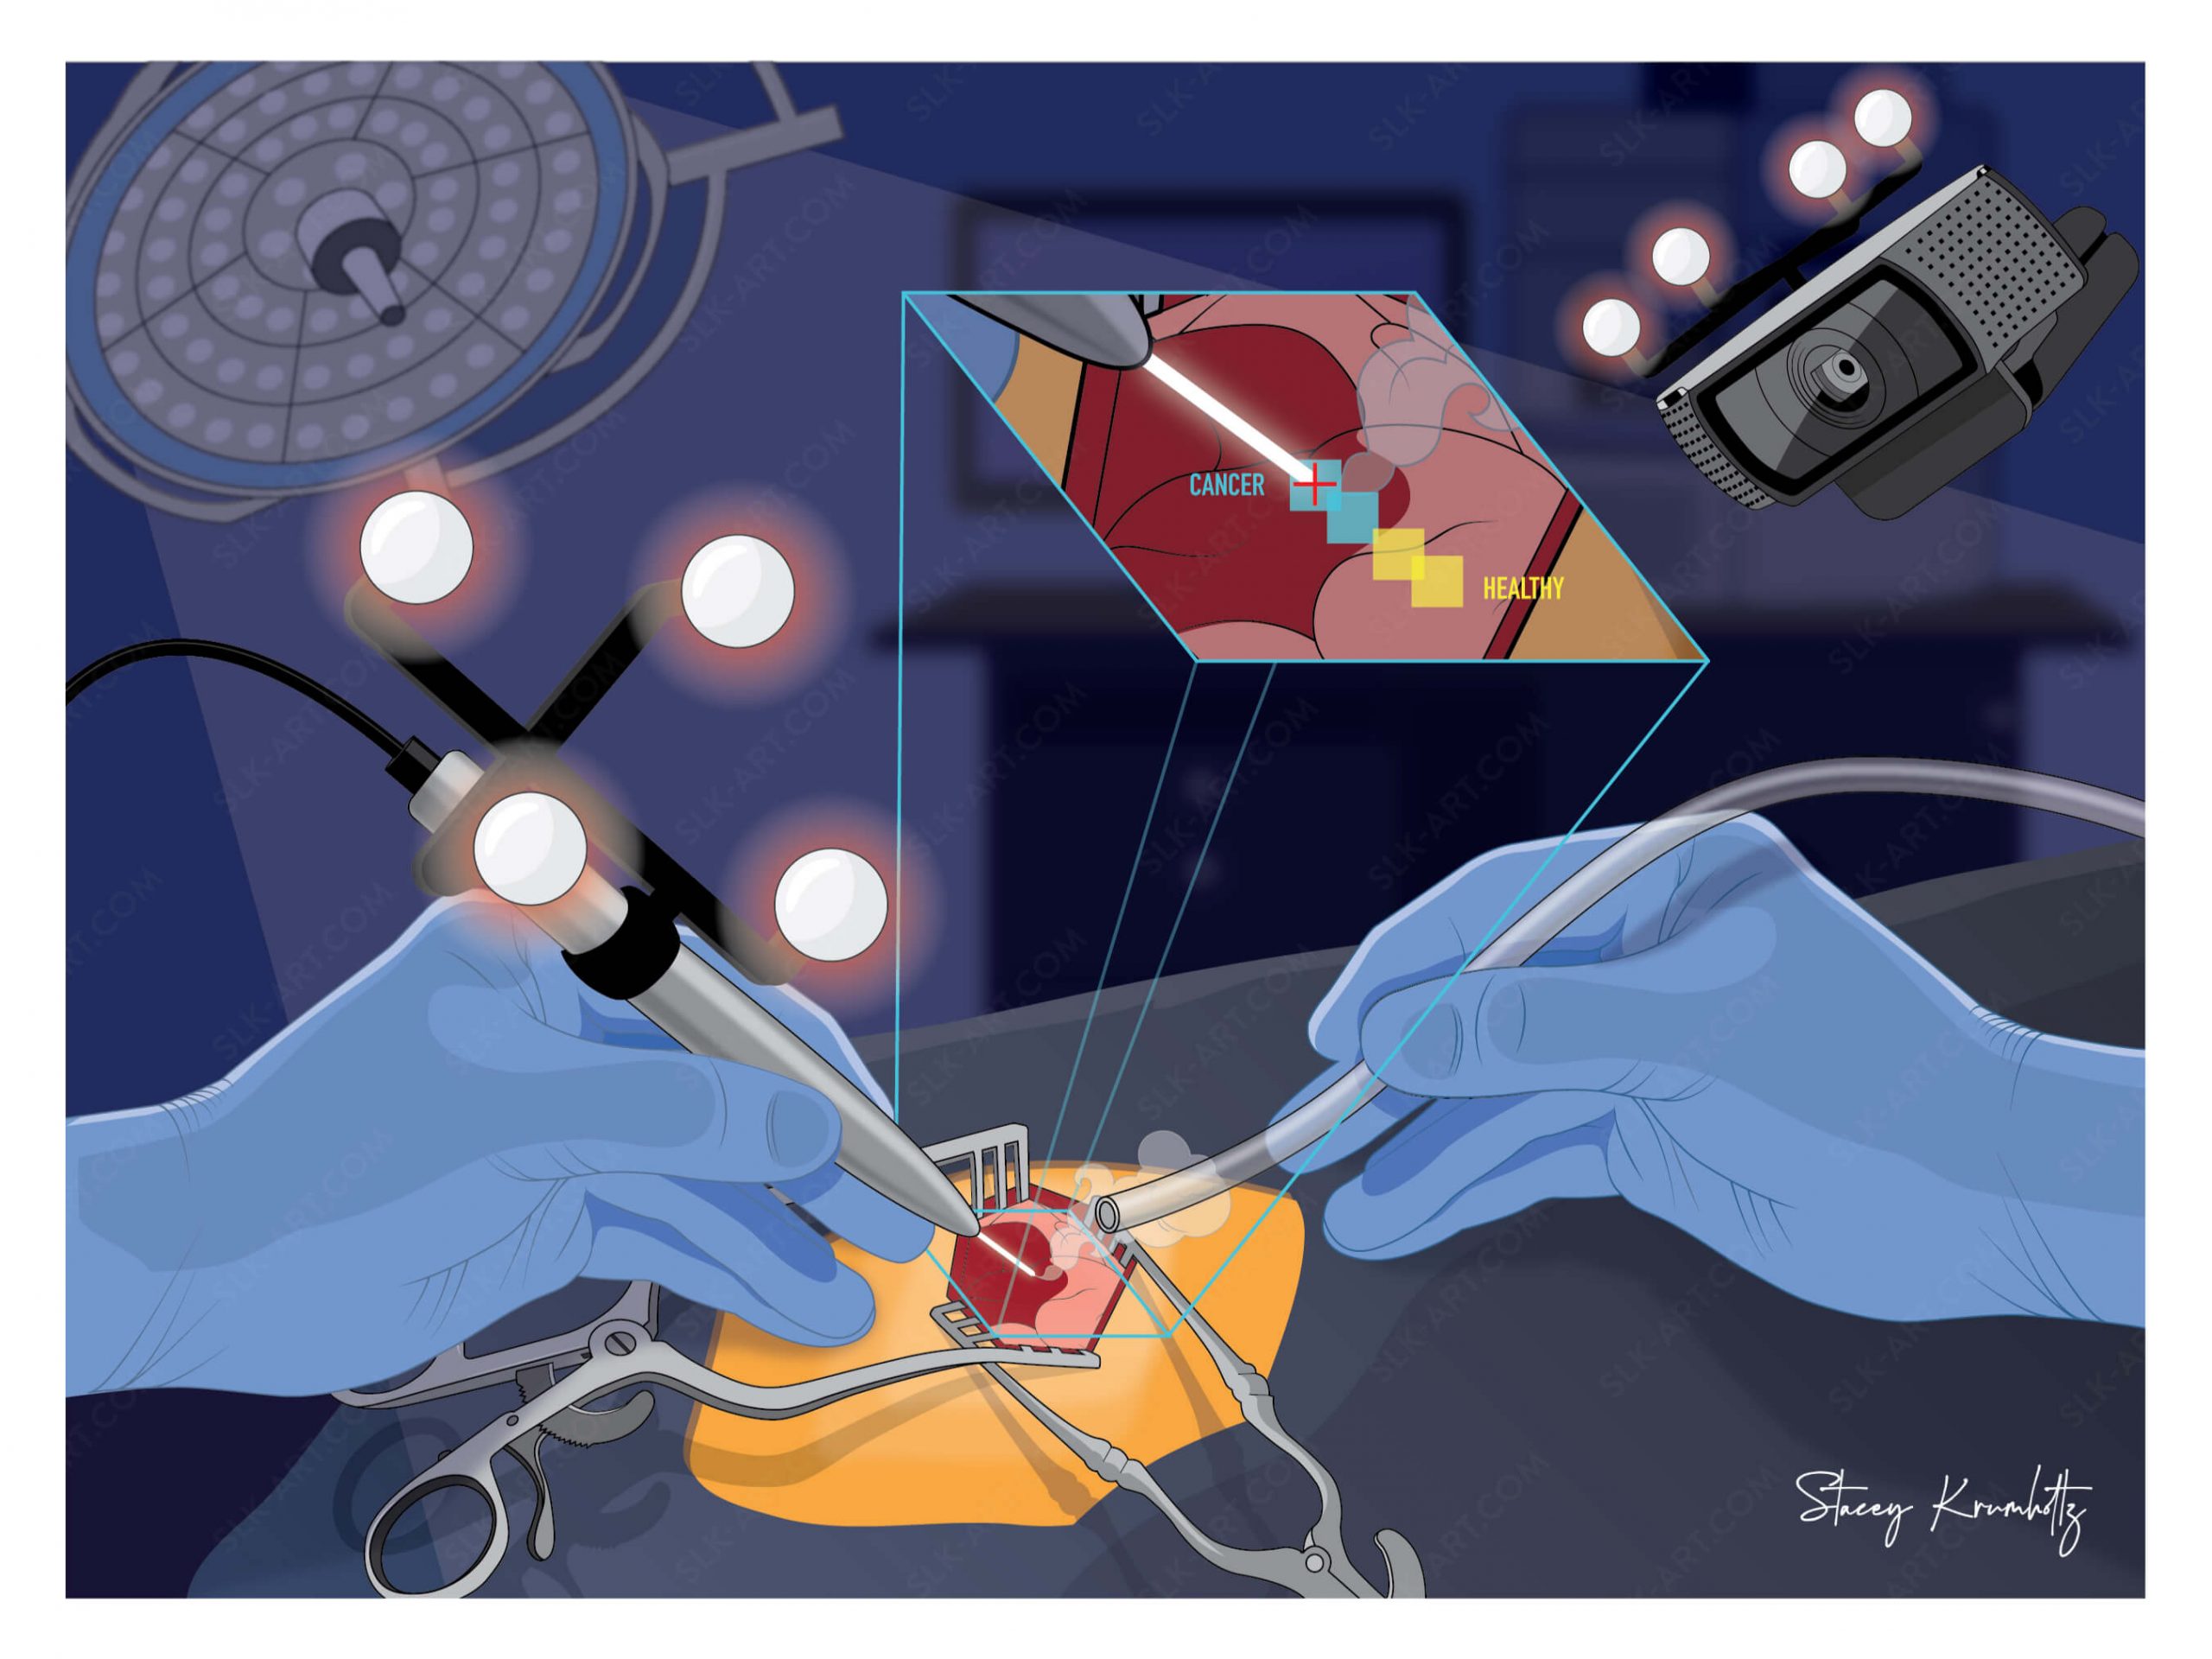 An illustration of a surgical procedure by Stacey Krumholtz.